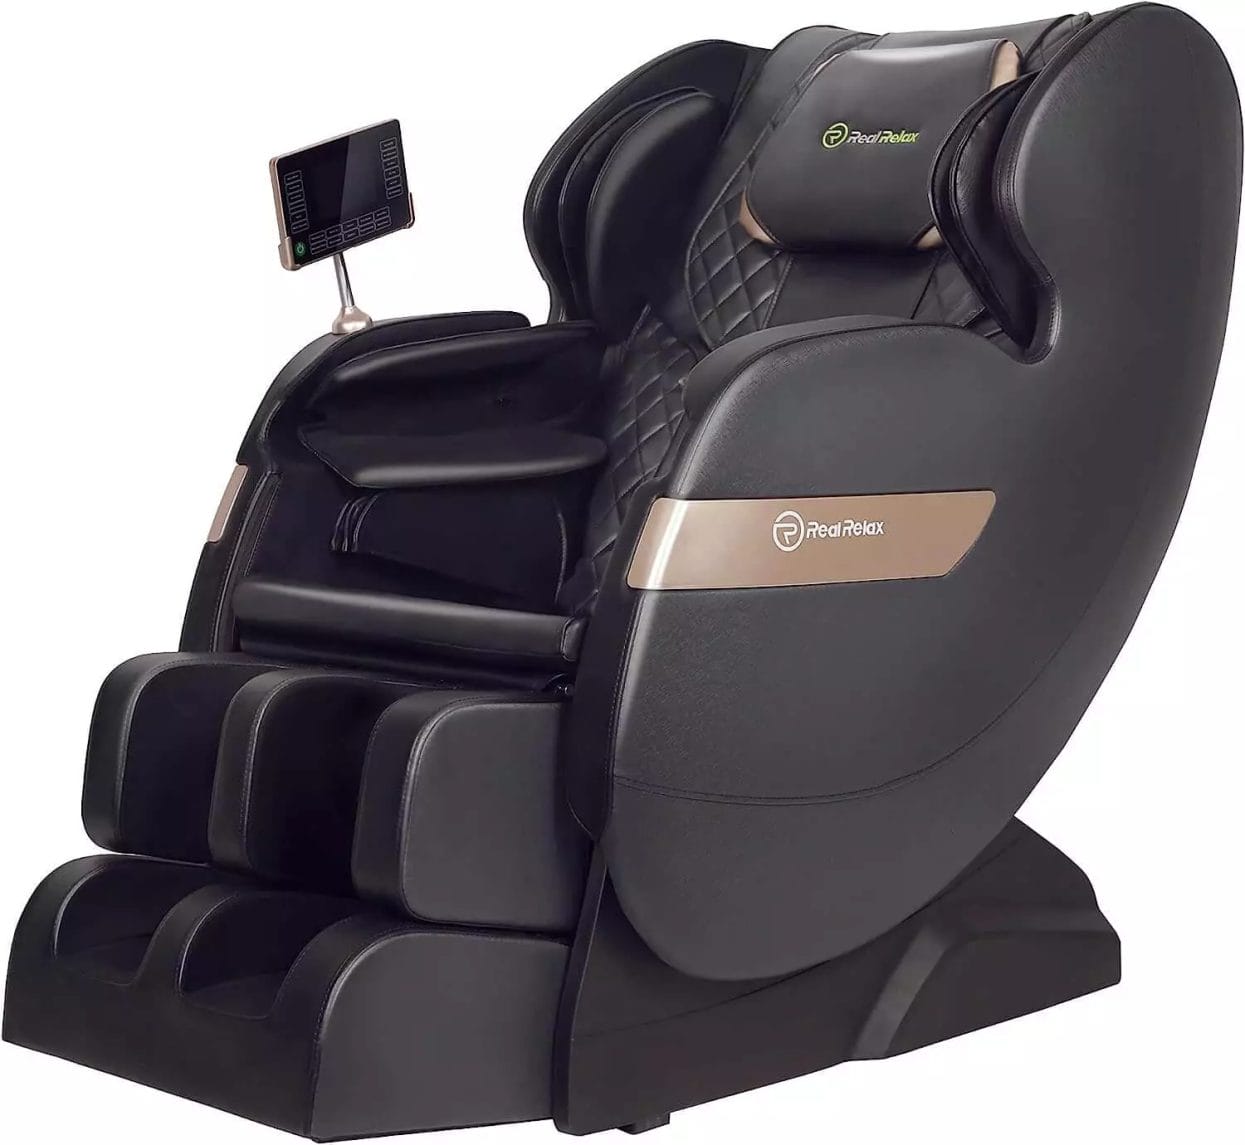 Real Relax 2023 Massage Chair of Dual-core S Track, Full Body Massage